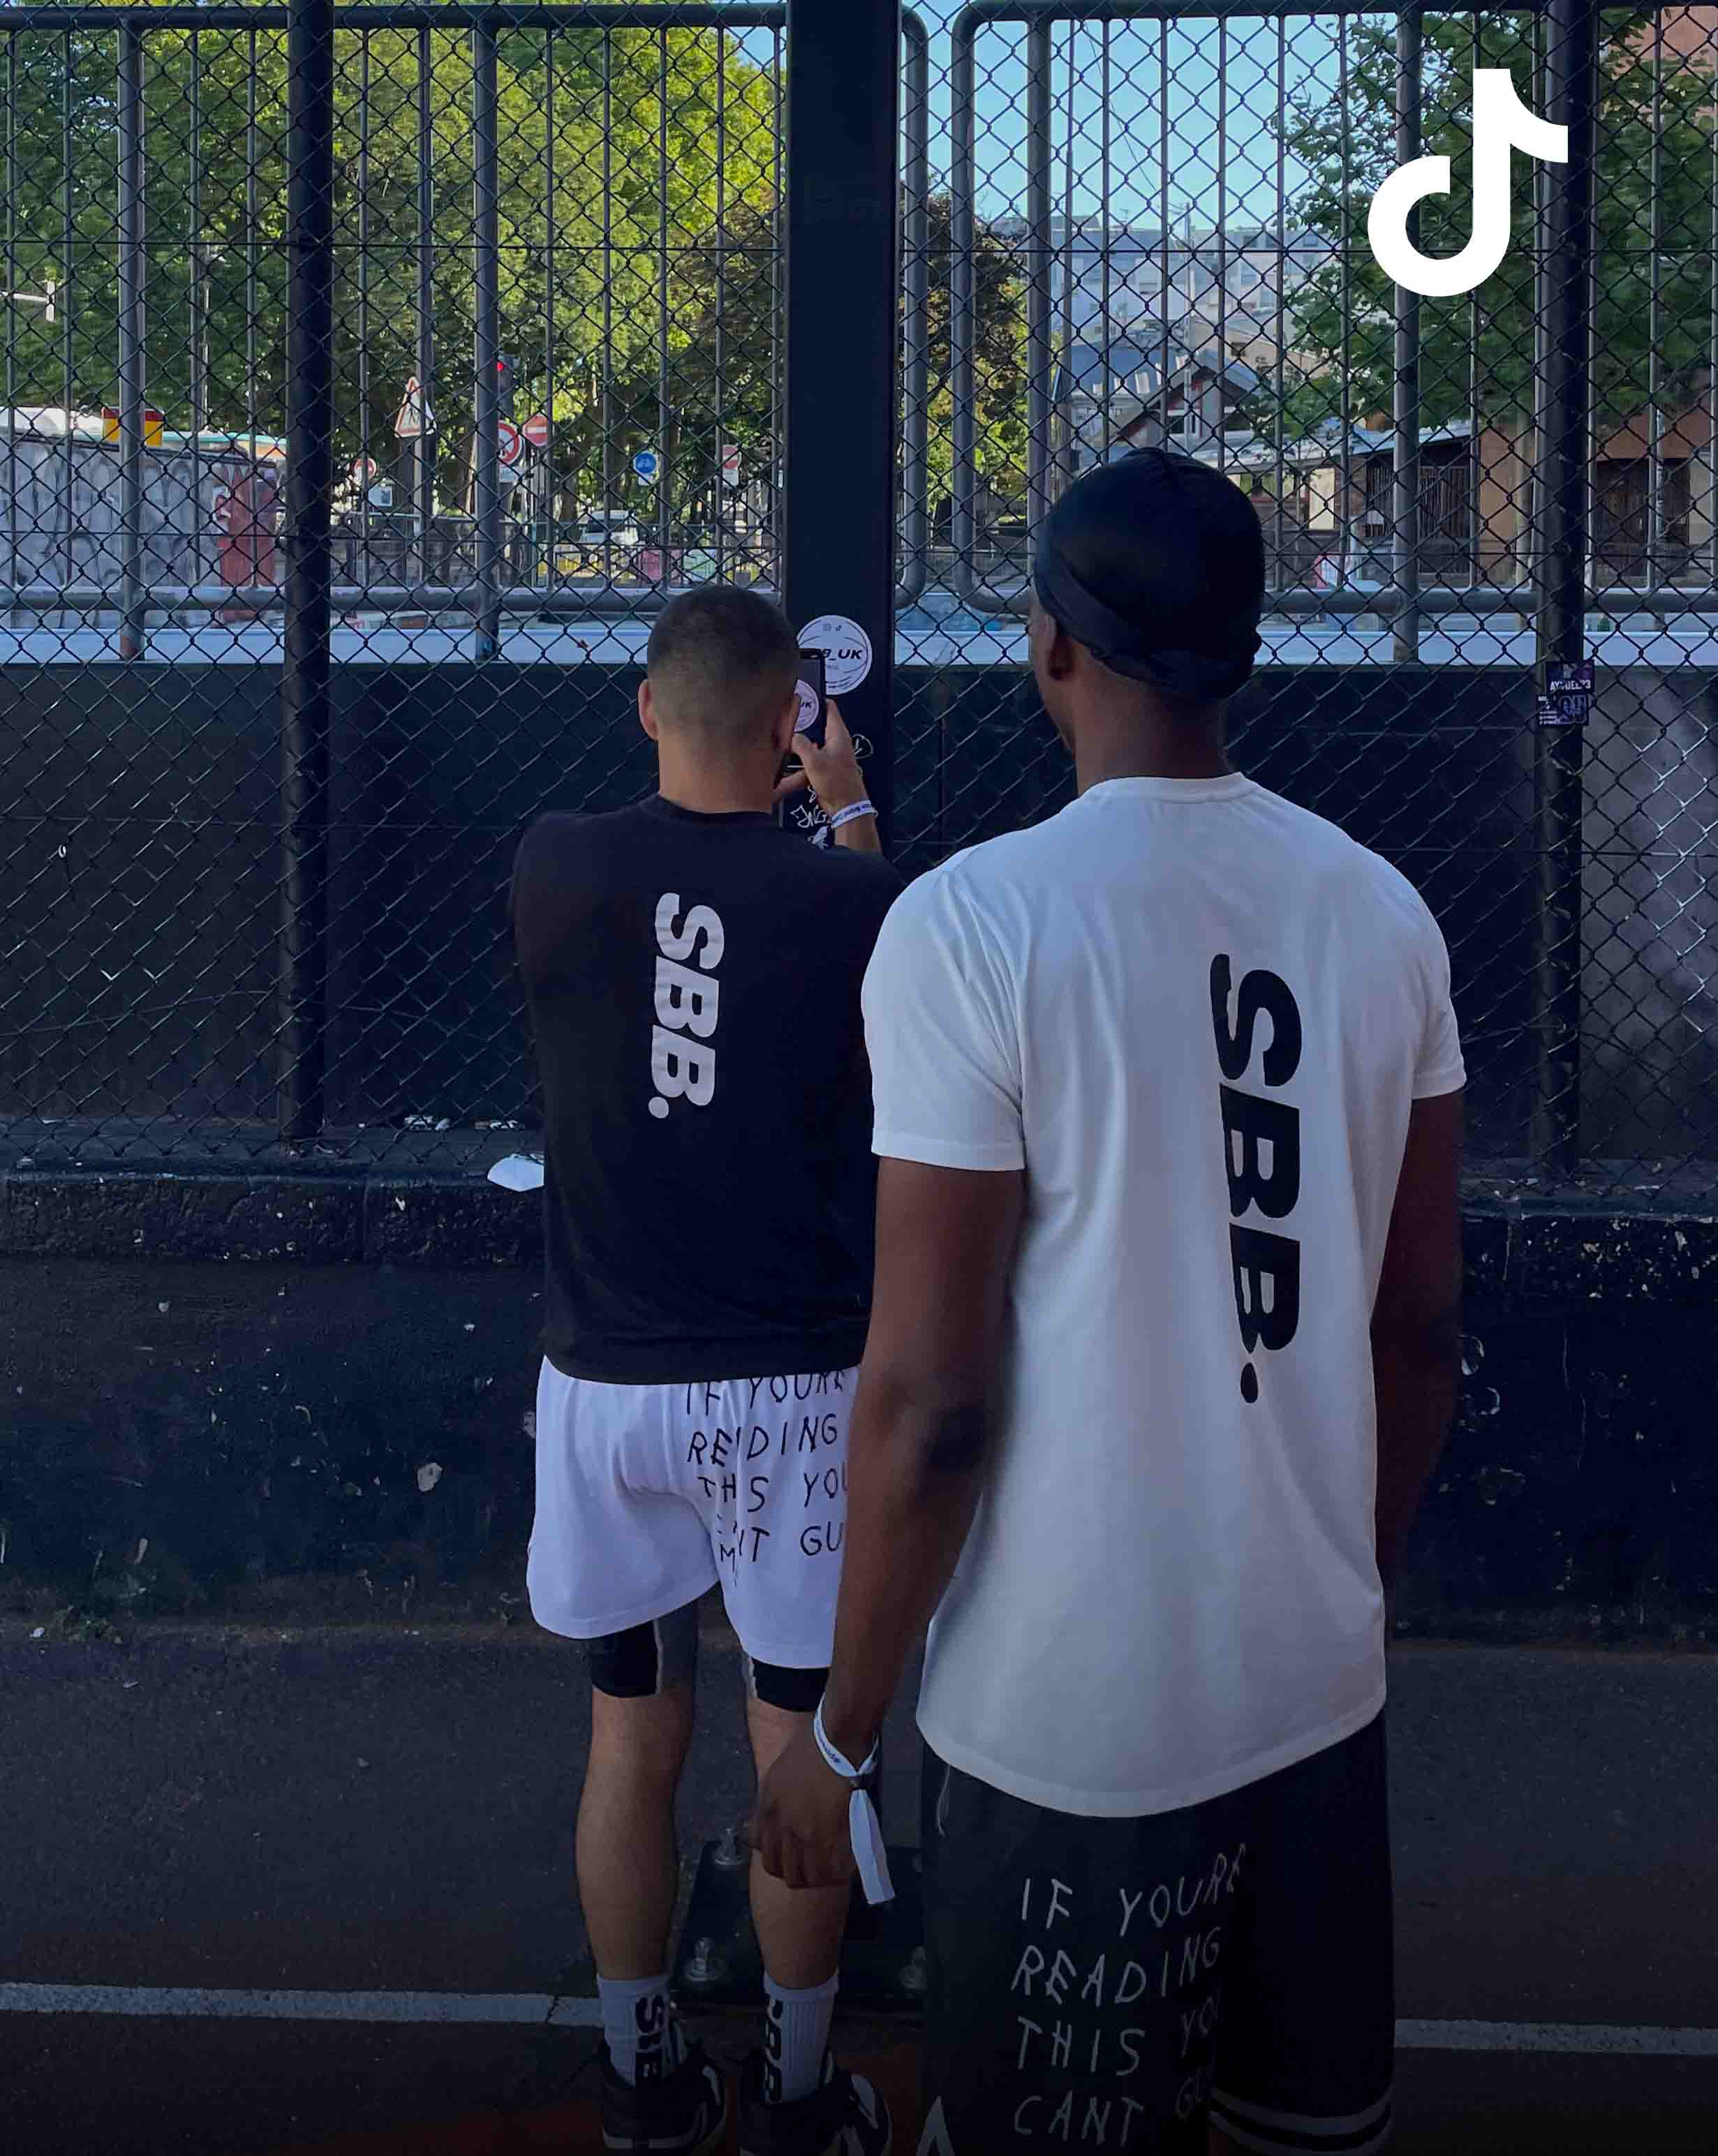 Behrad & Denzel from Simply British Ballers. (SBB.) stand on a basketball court in Balti Zone Paris putting up a signature SBB sticker on the basekt